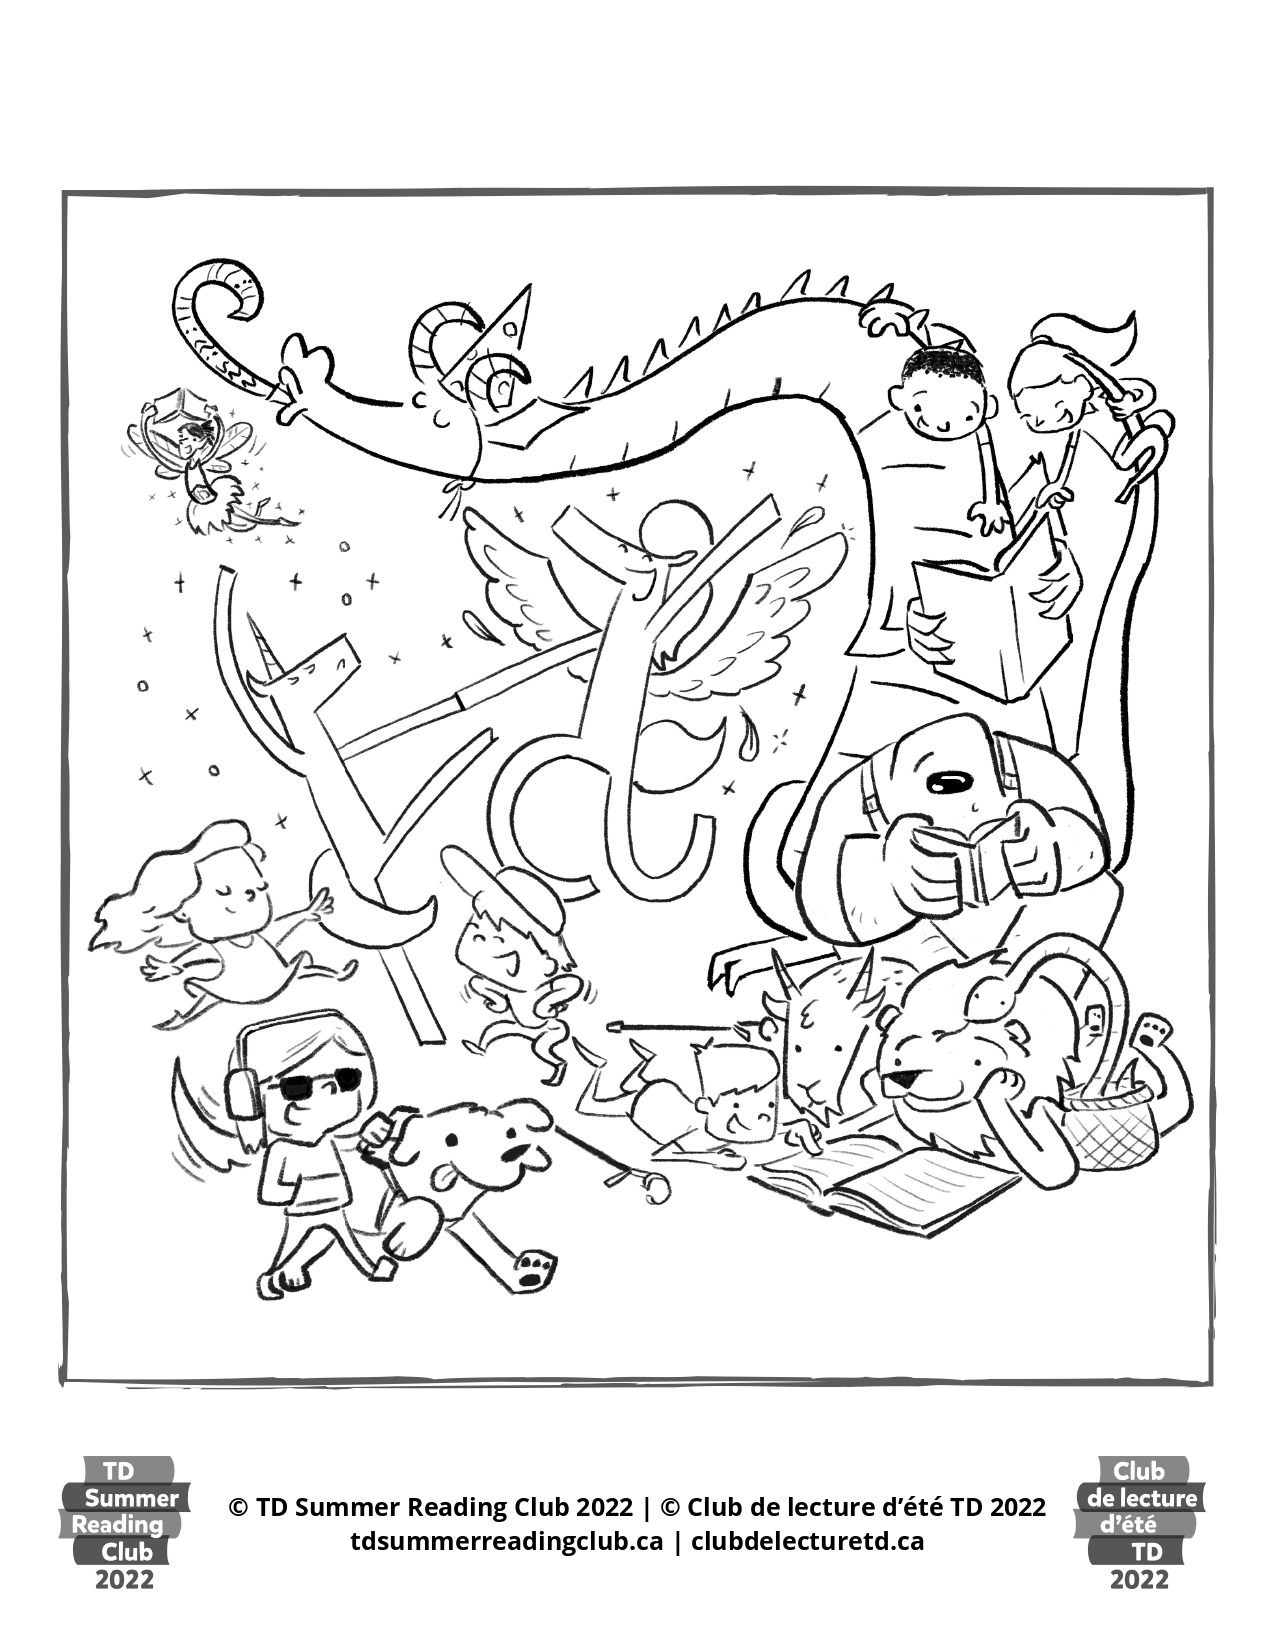 Colouring contest page party